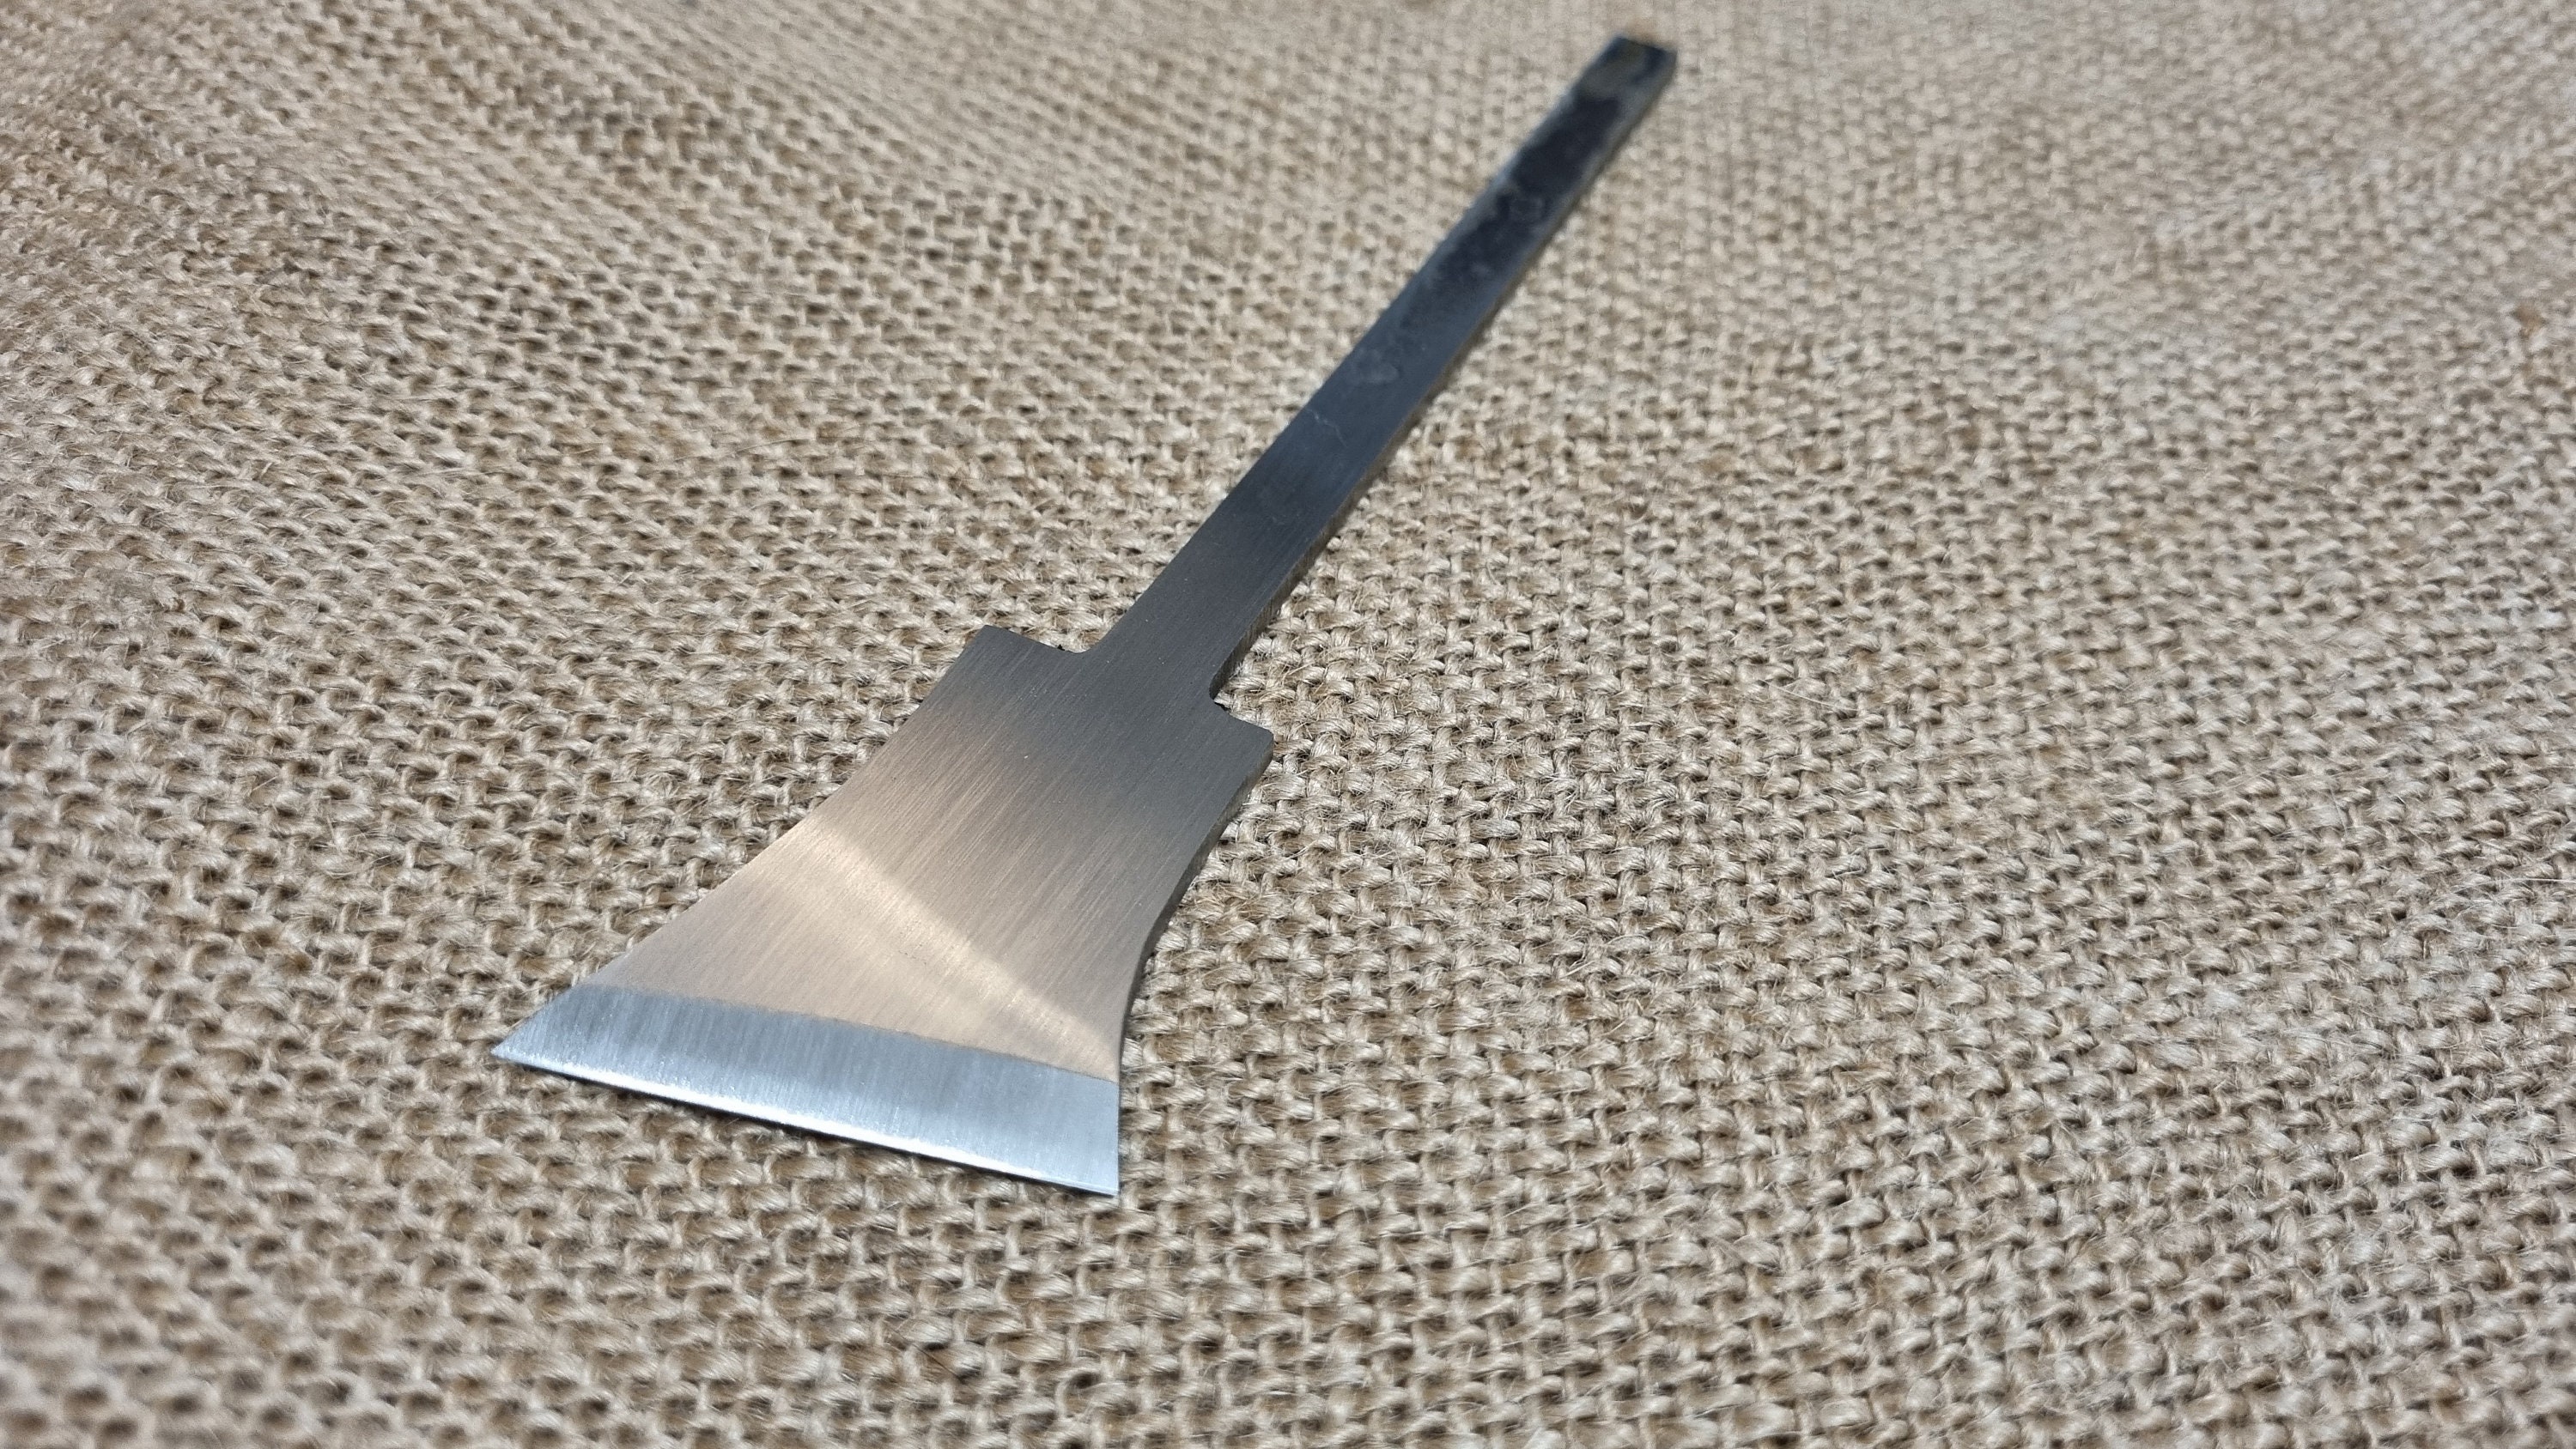 Multilayers Carbon Steel Blade Blank, Hand Forge for Knife Making.